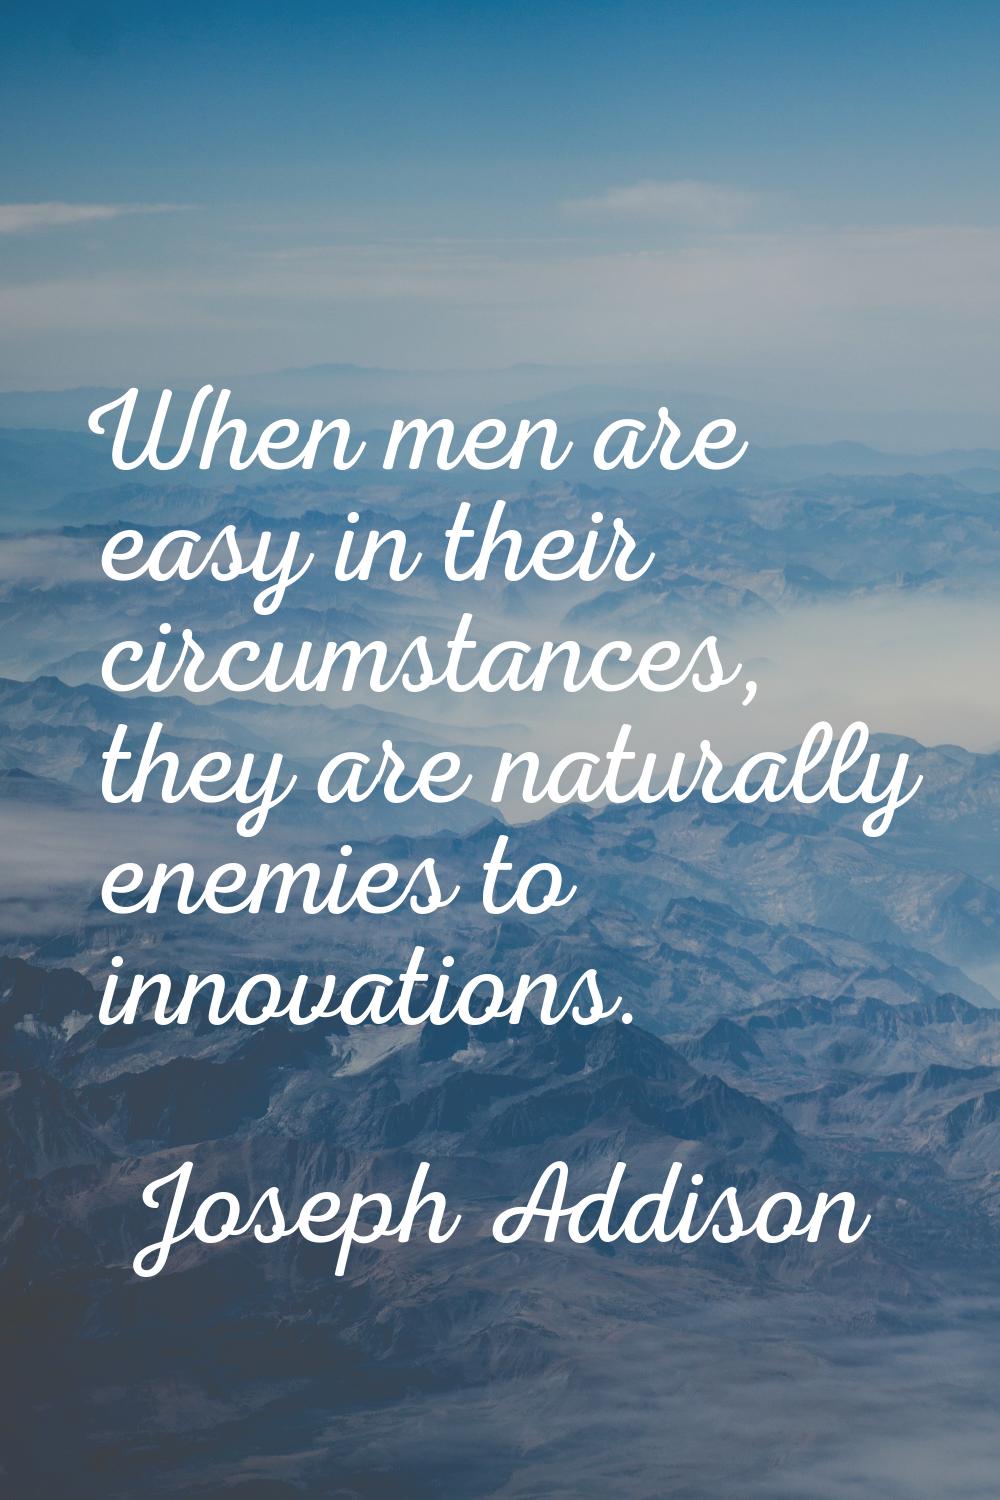 When men are easy in their circumstances, they are naturally enemies to innovations.